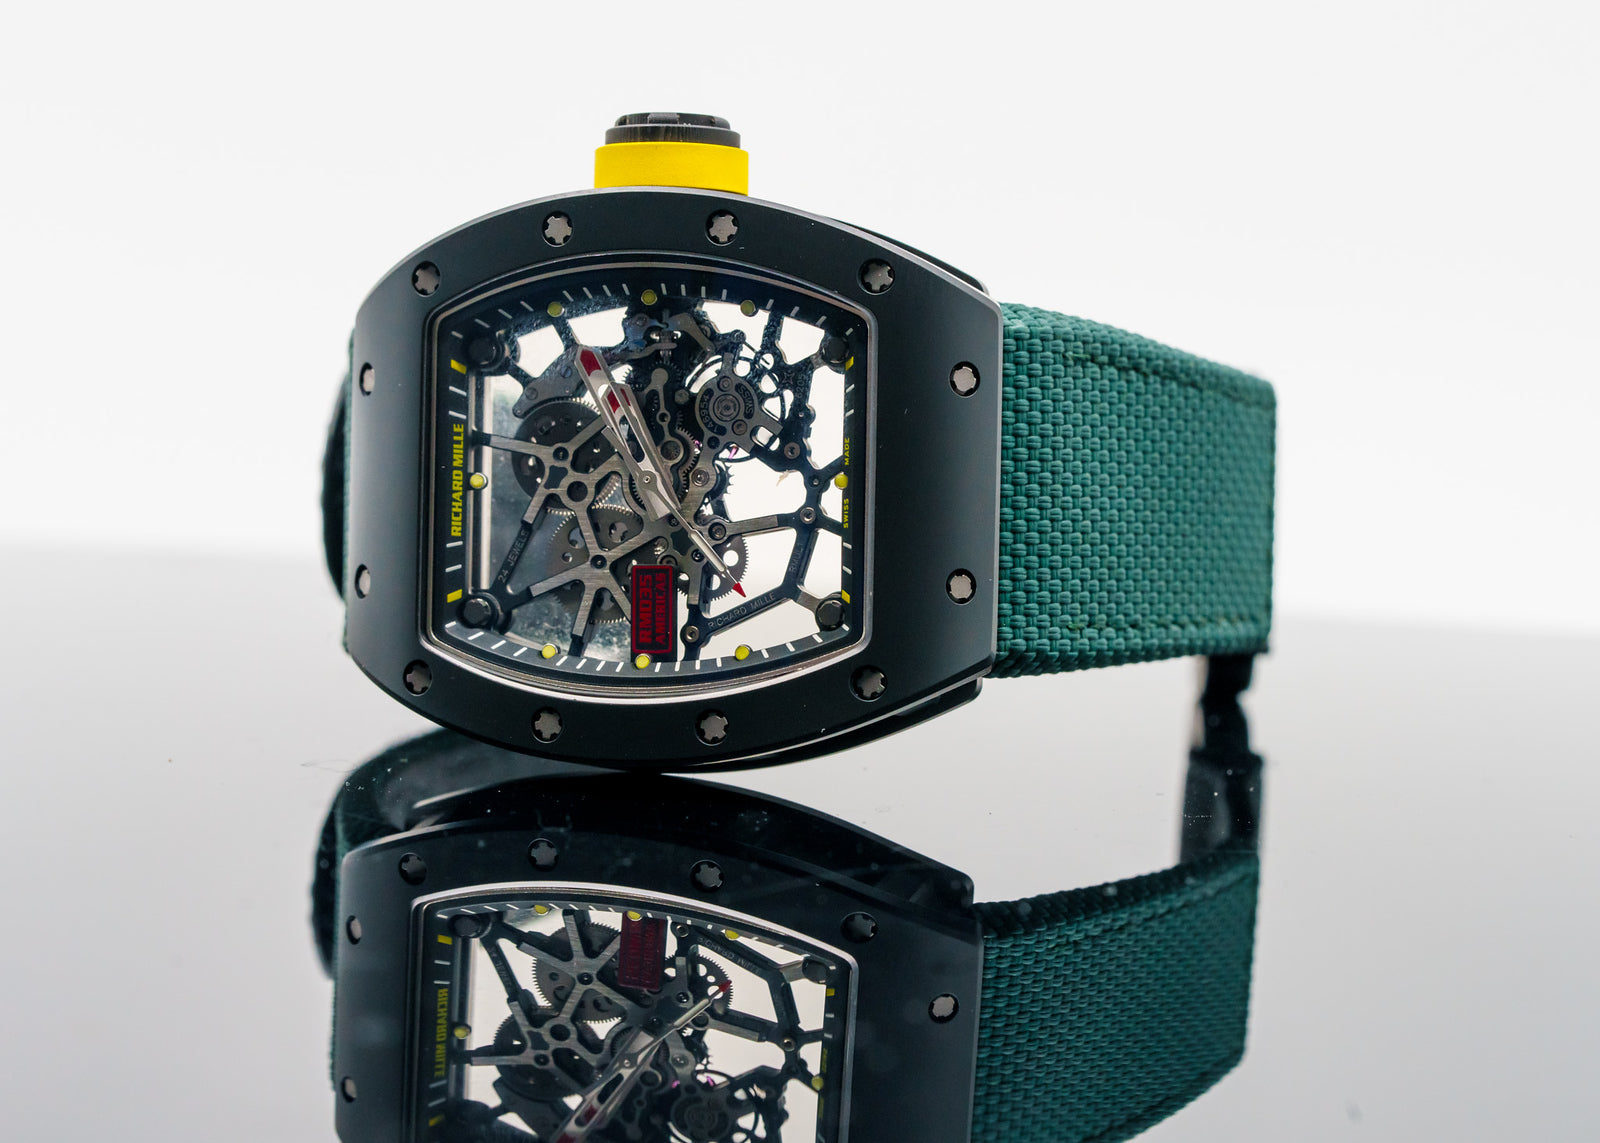 Richard Mille Rm035 Americas (50 Piece Limited Edition)